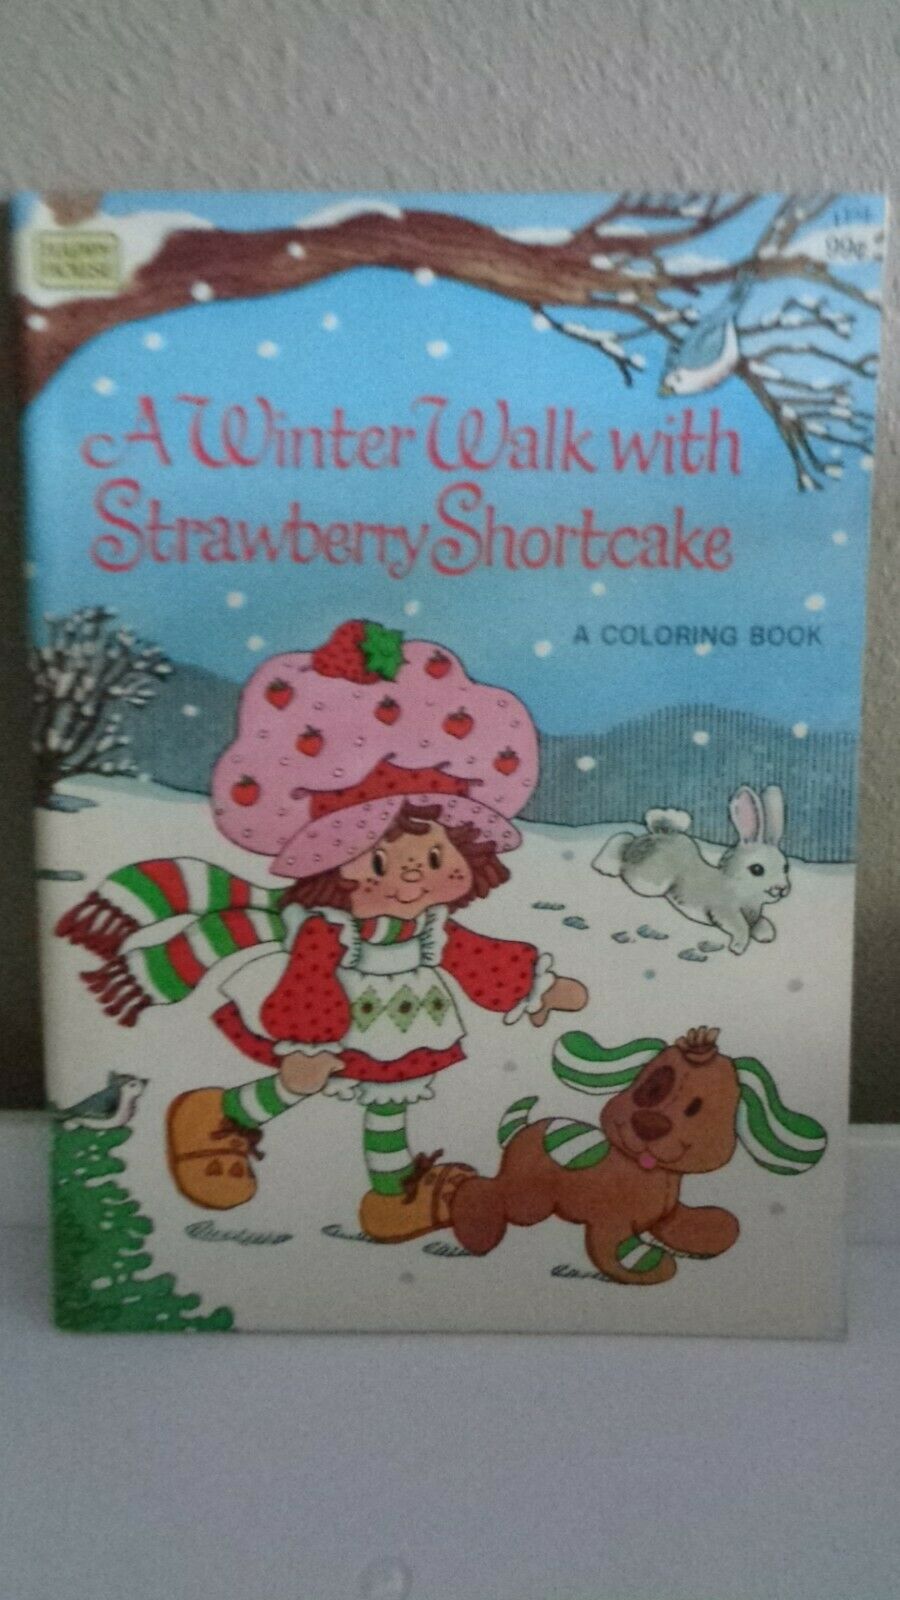 Vintage Strawberry Shortcake A Winter Walk With... Coloring Book Unused 1981